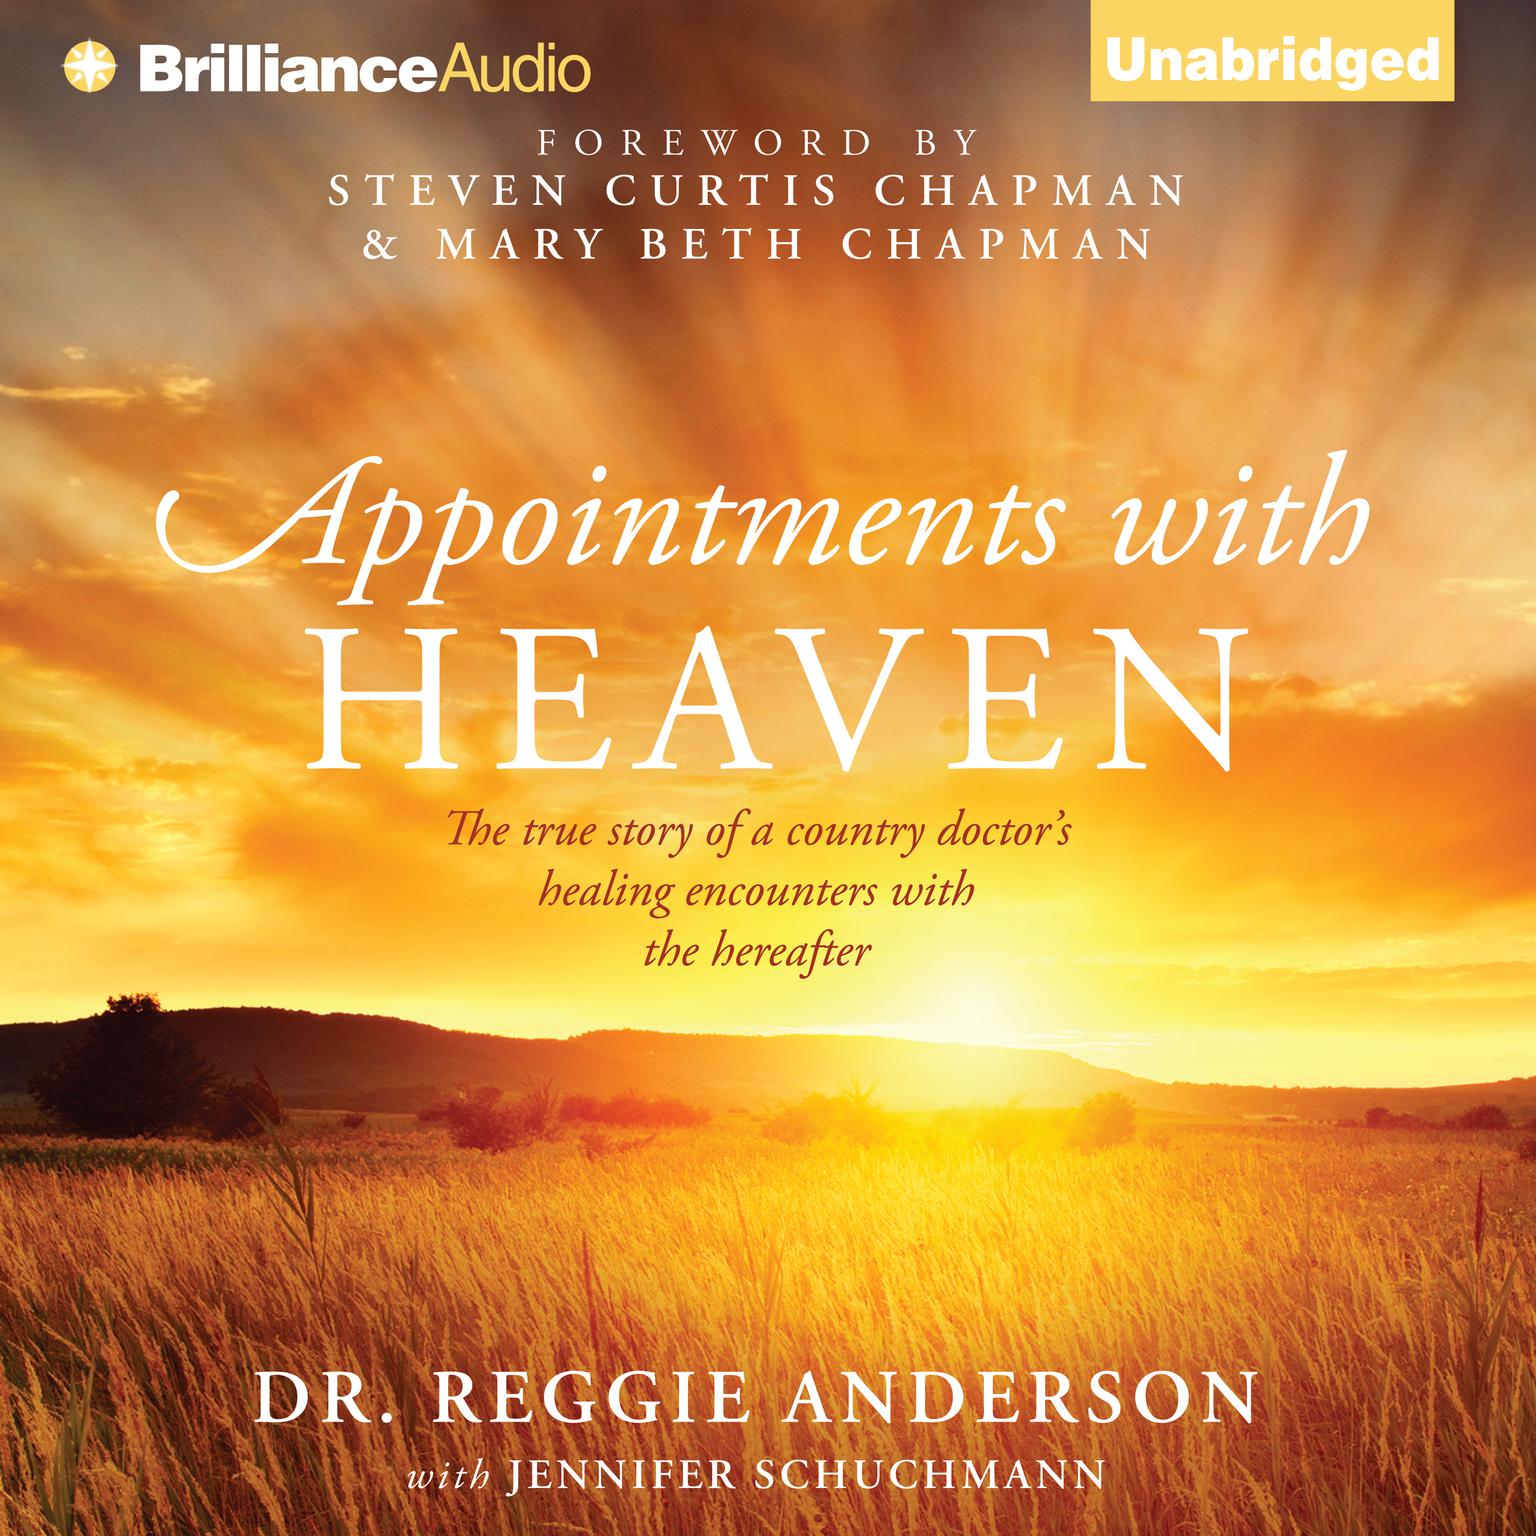 Appointments with Heaven: The True Story of a Country Doctors Healing Encounters with the Hereafter Audiobook, by Reggie Anderson